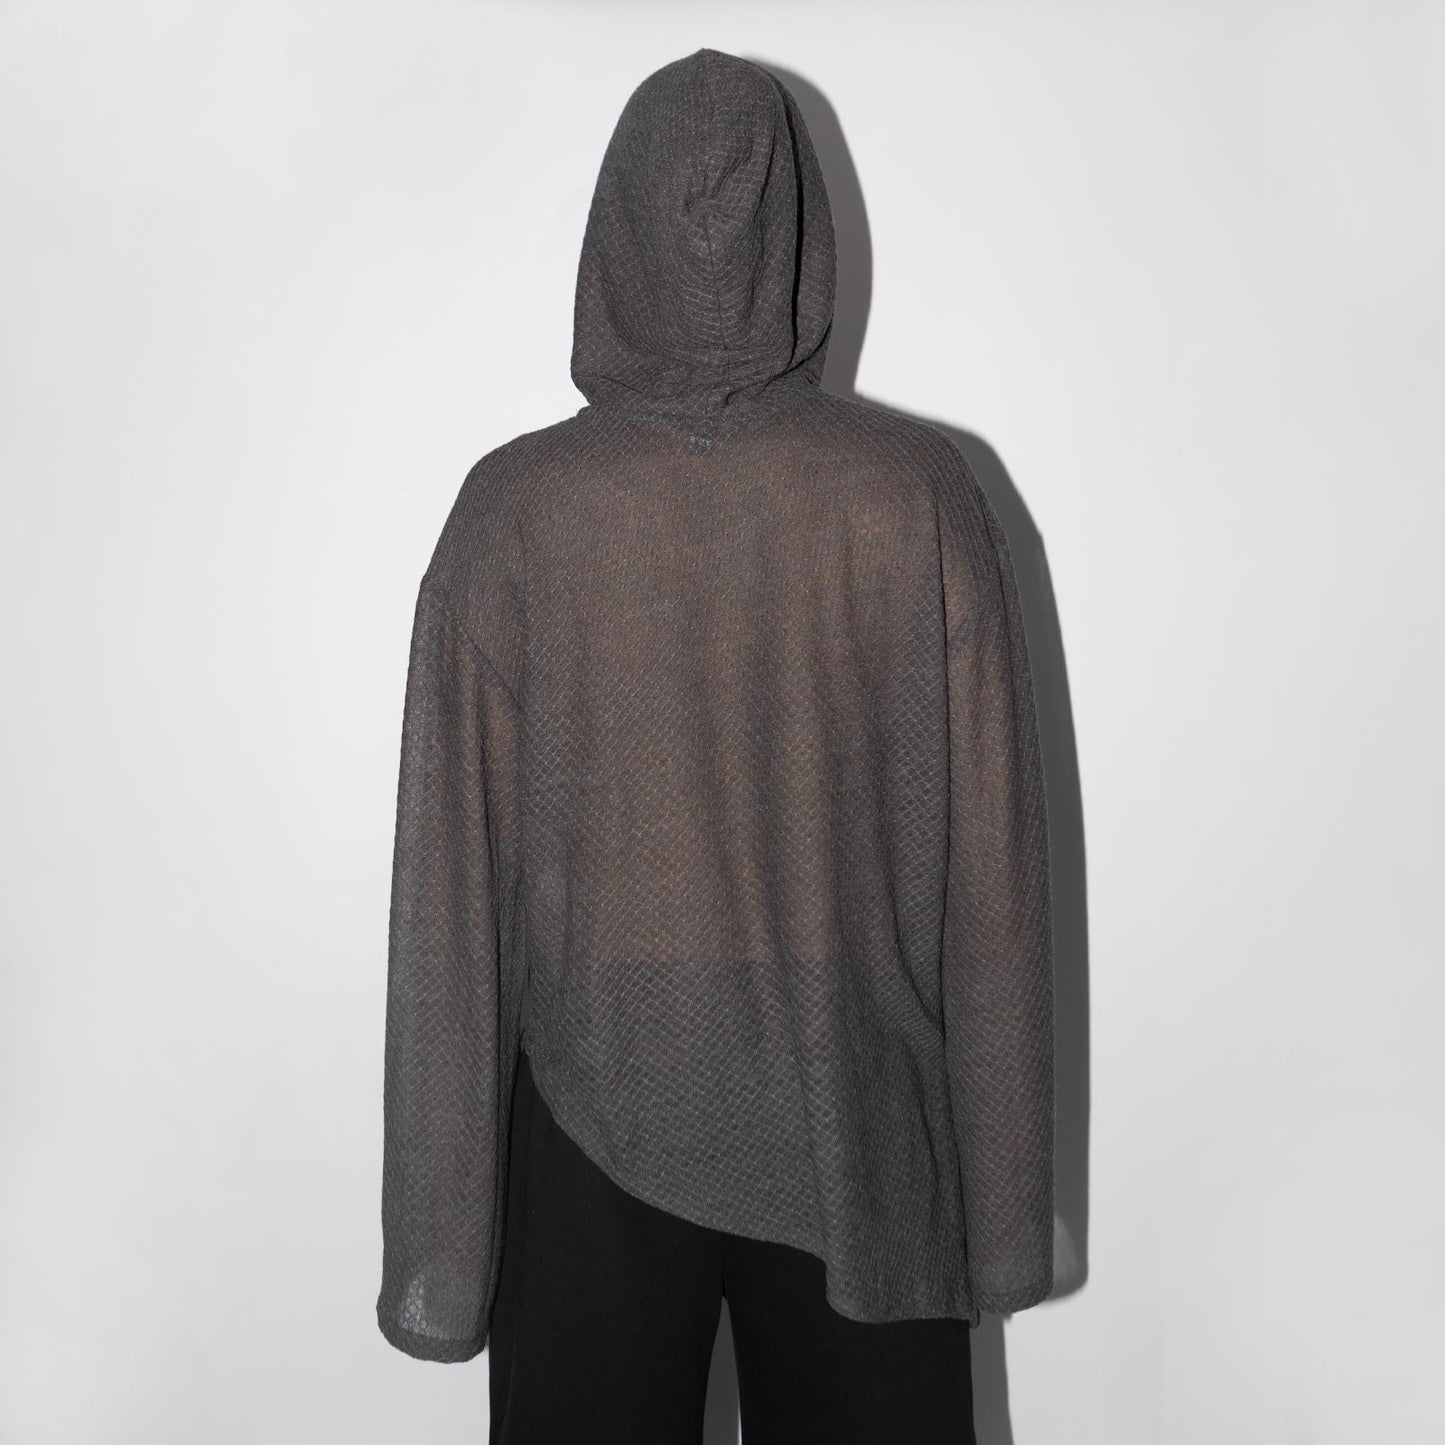 GREY HOODED JERSEY